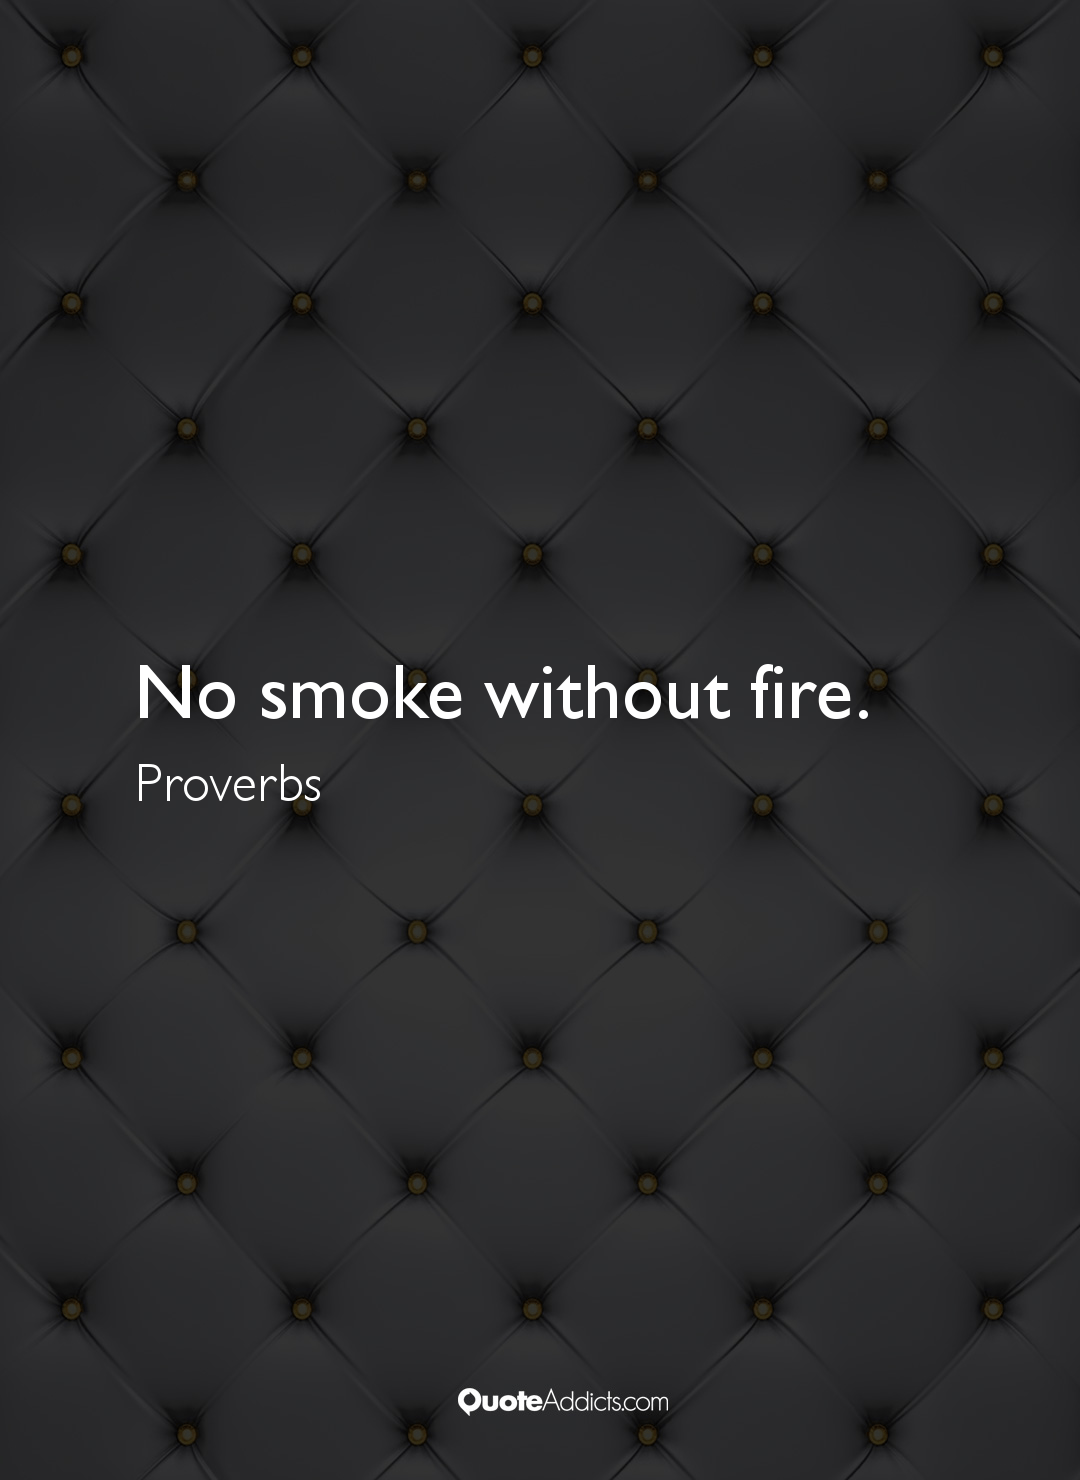 Proverbs Quote. No smoke without fire